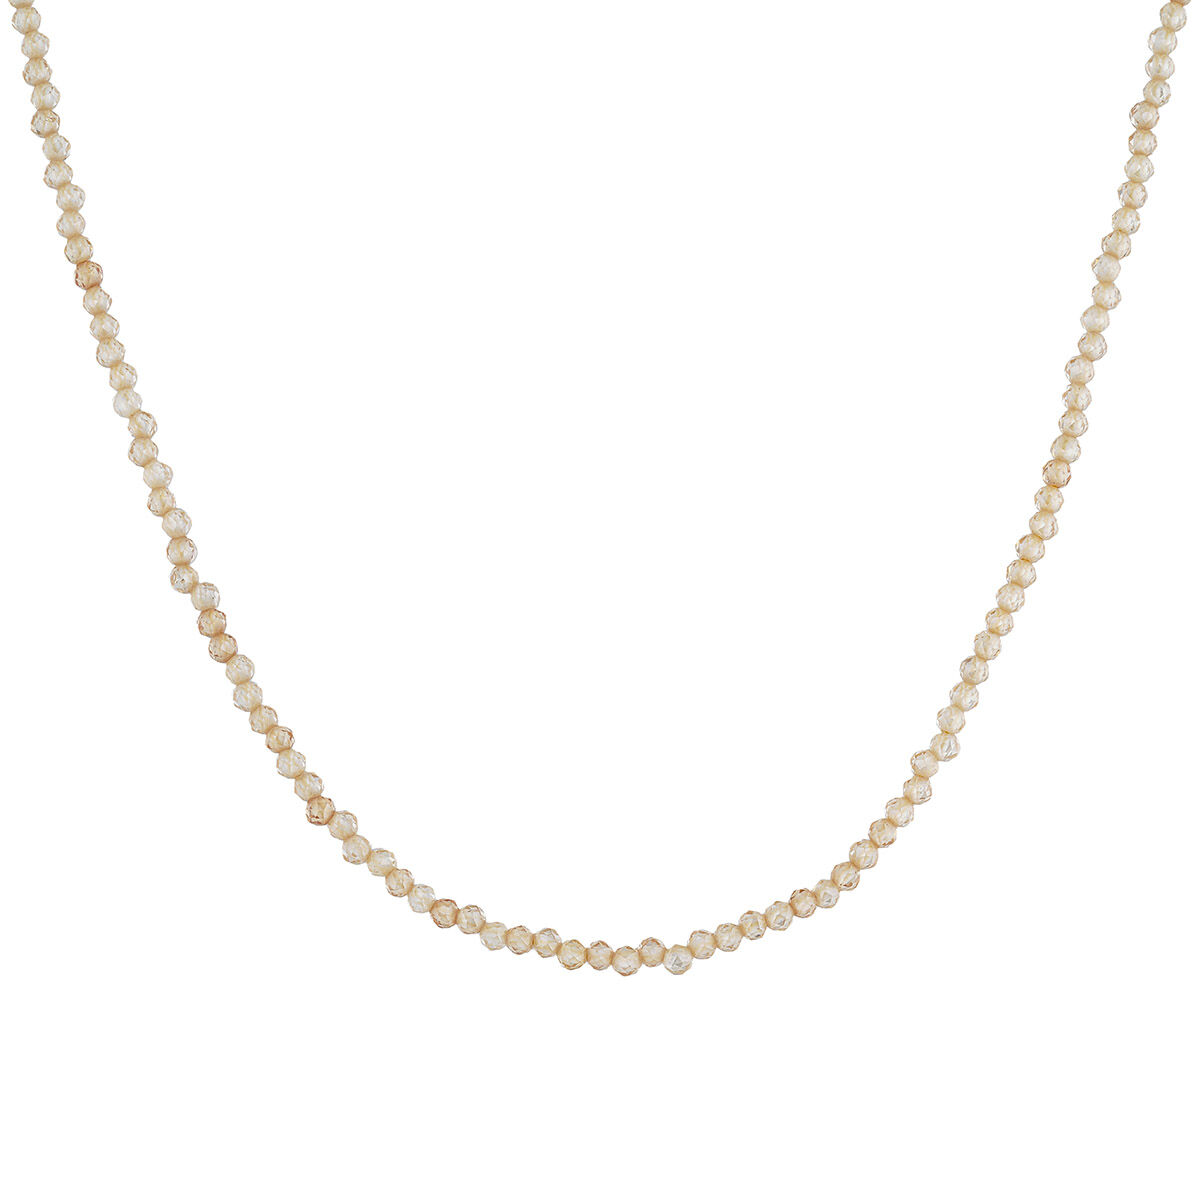 Gold plated ball chain zircon necklace , J04618-02-ZI, hi-res